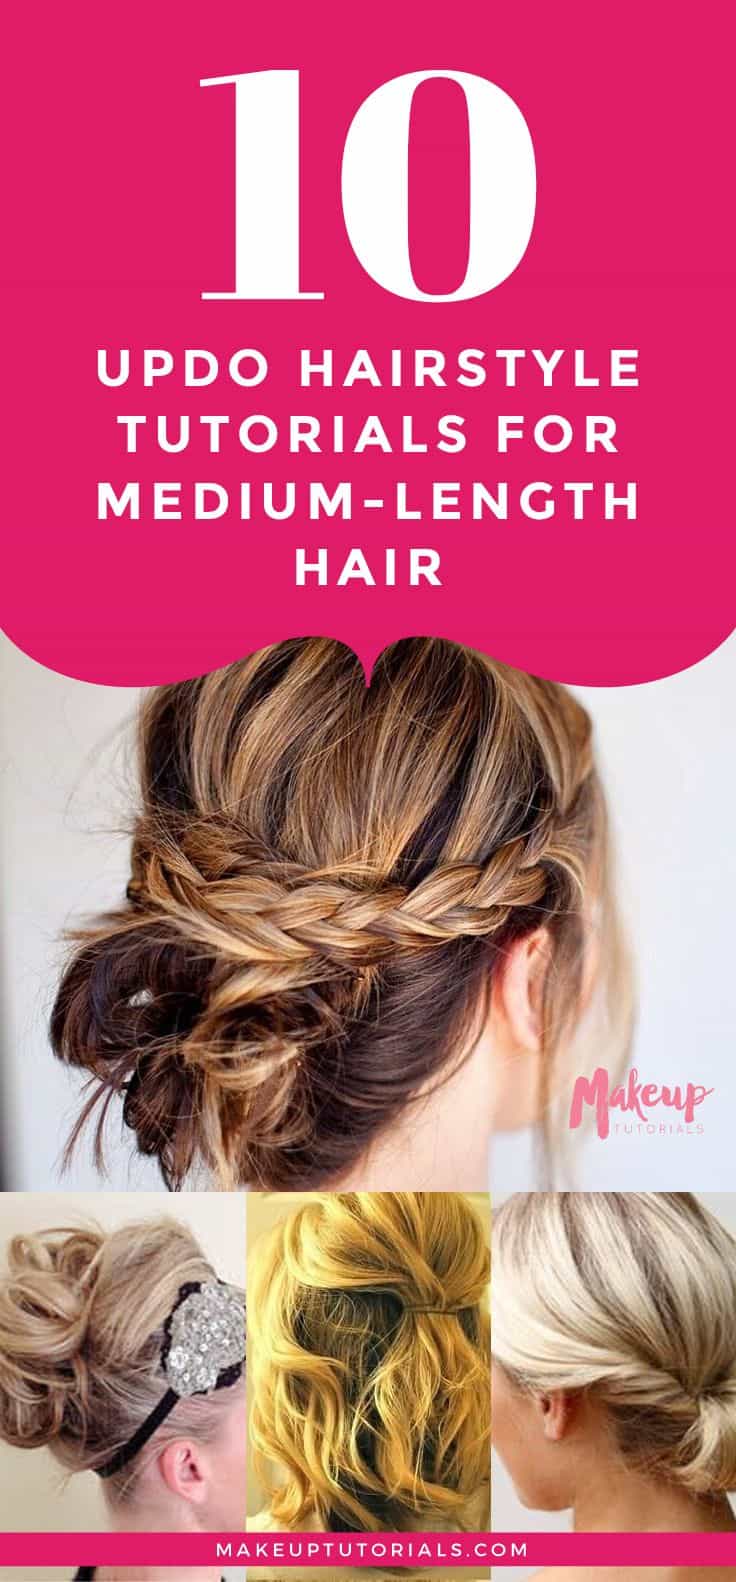 Hairstyle tutorials for your next gno